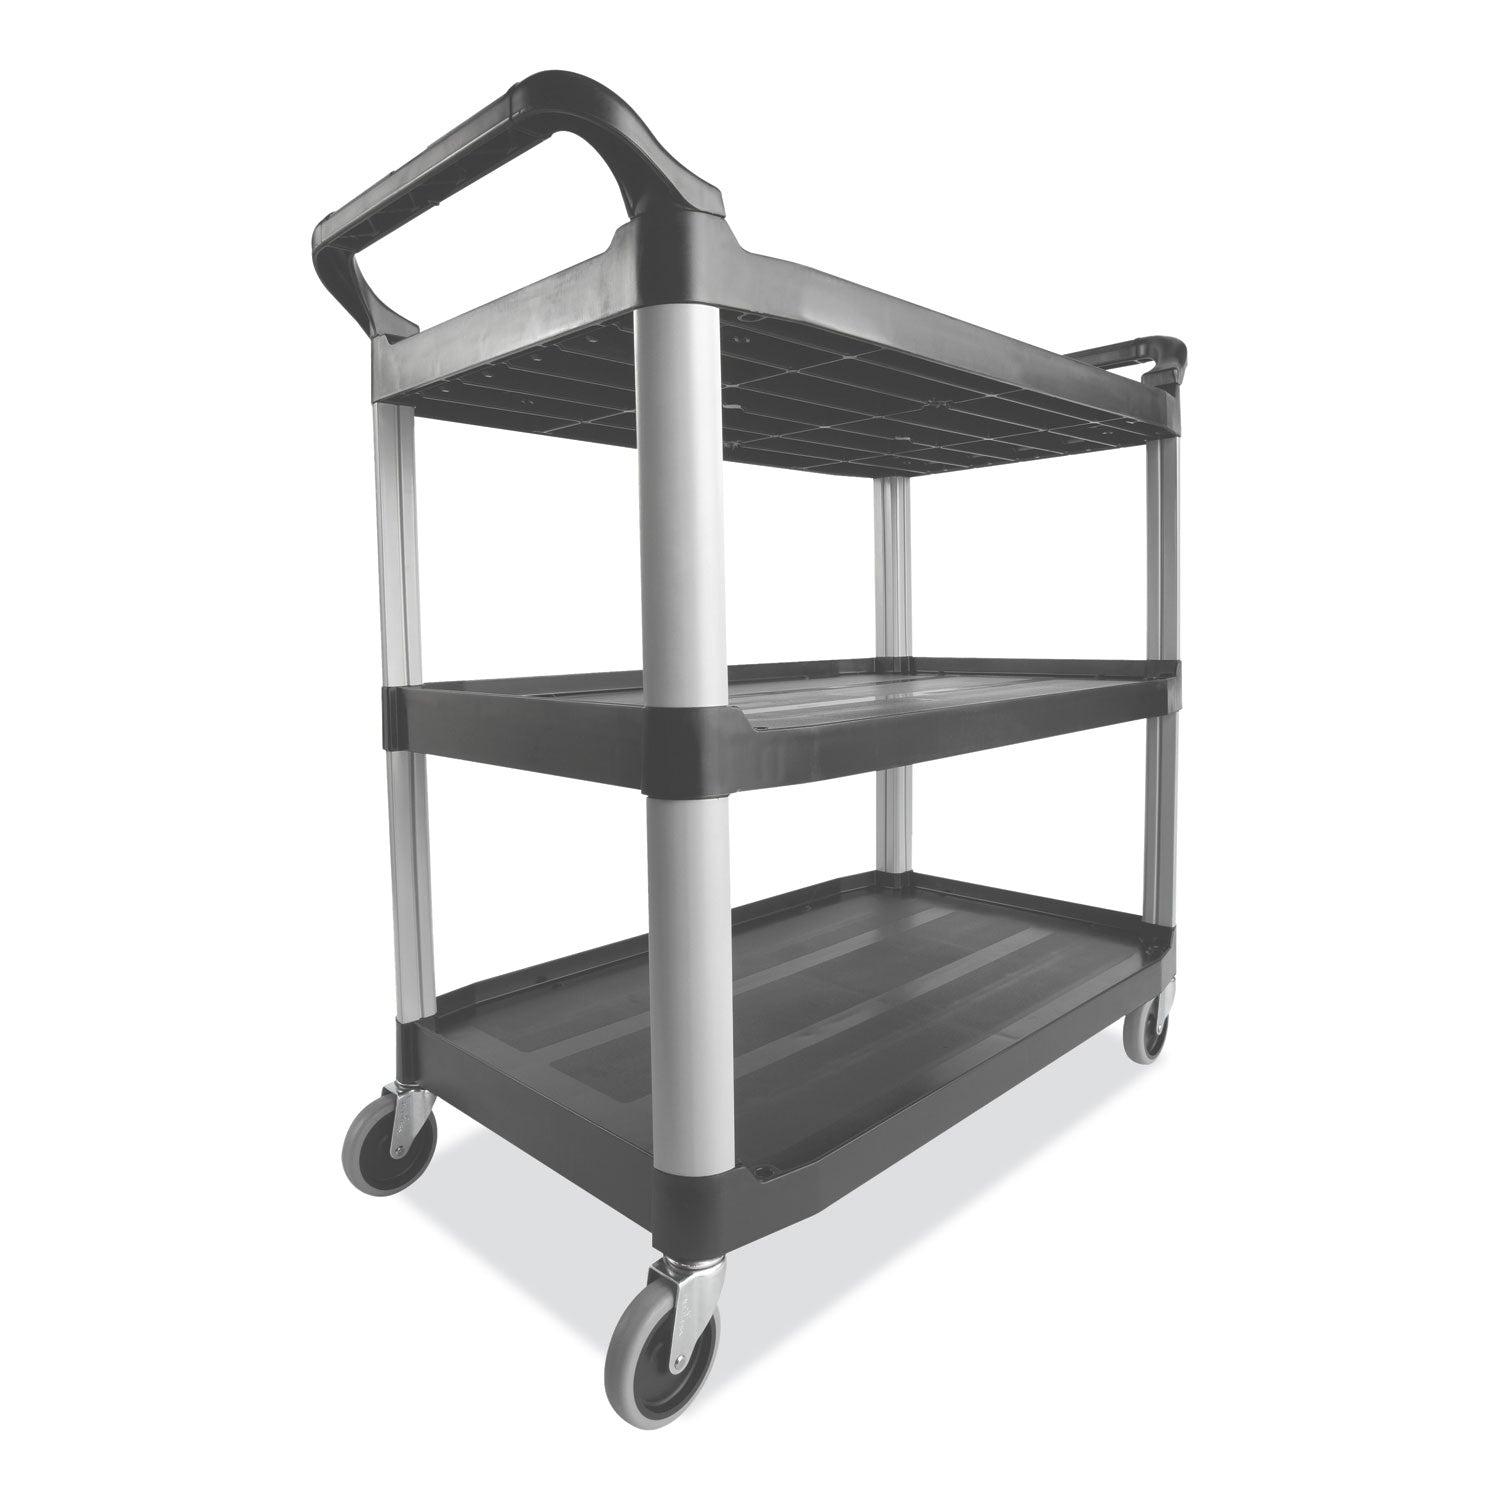 xtra-utility-cart-with-open-sides-plastic-3-shelves-300-lb-capacity-20-x-4063-x-378-gray_rcp4091gra - 2